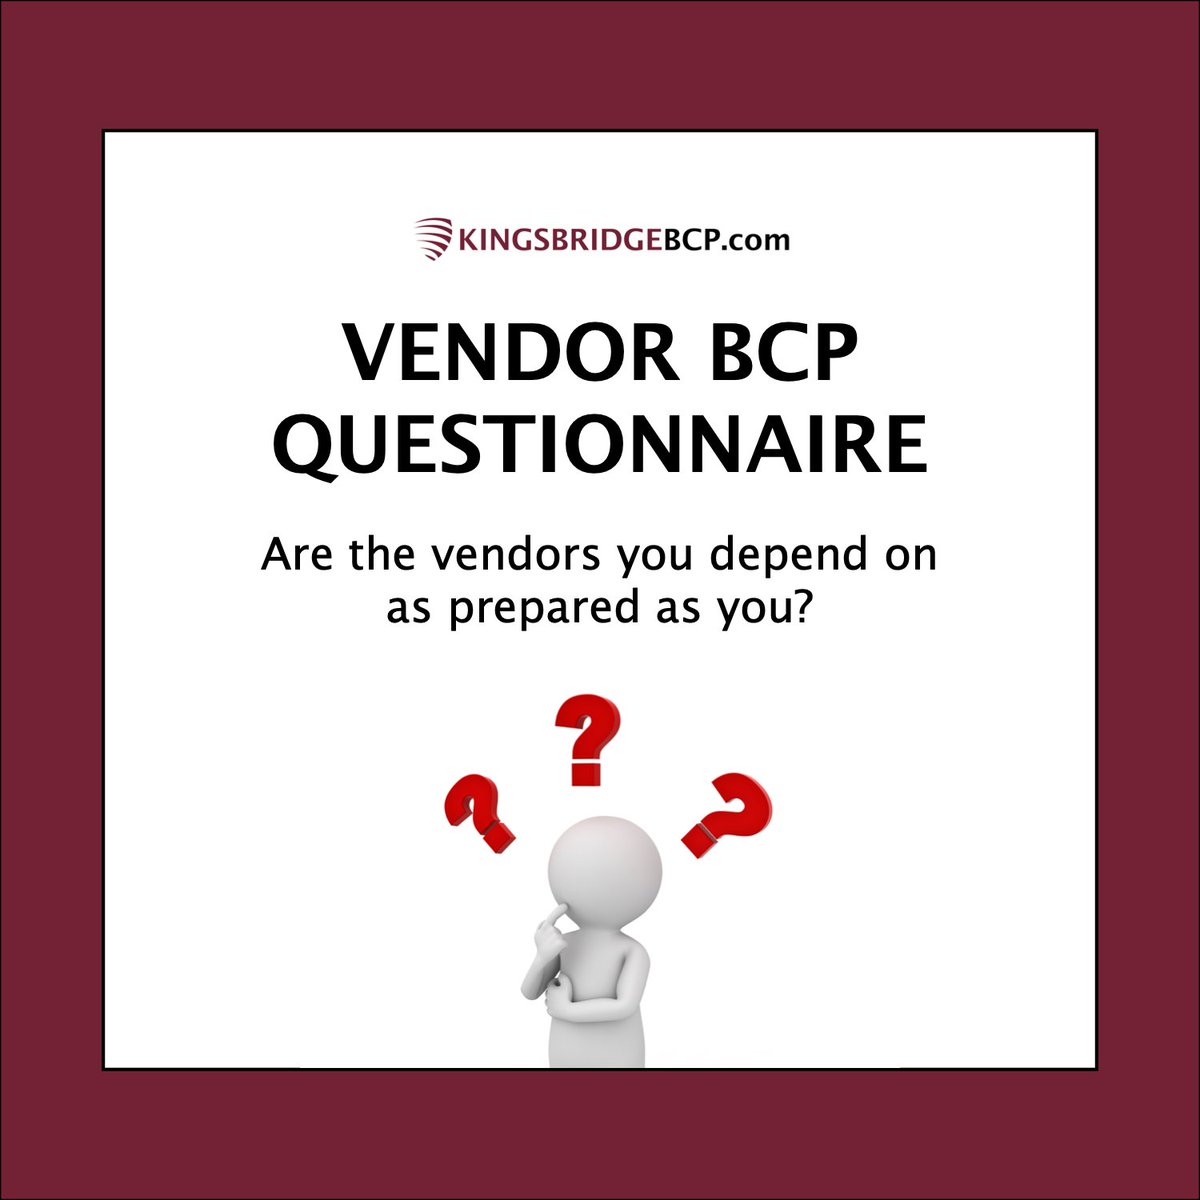 Are your vendors & 3rd party suppliers able to continue supporting you when THEY have an incident? Protect your business by using our Vendor BCP Questionnaire so you can be prepared. kingsbridgebcp.biz/3WWCPe0 #KISSBCP #BusinessContinuity